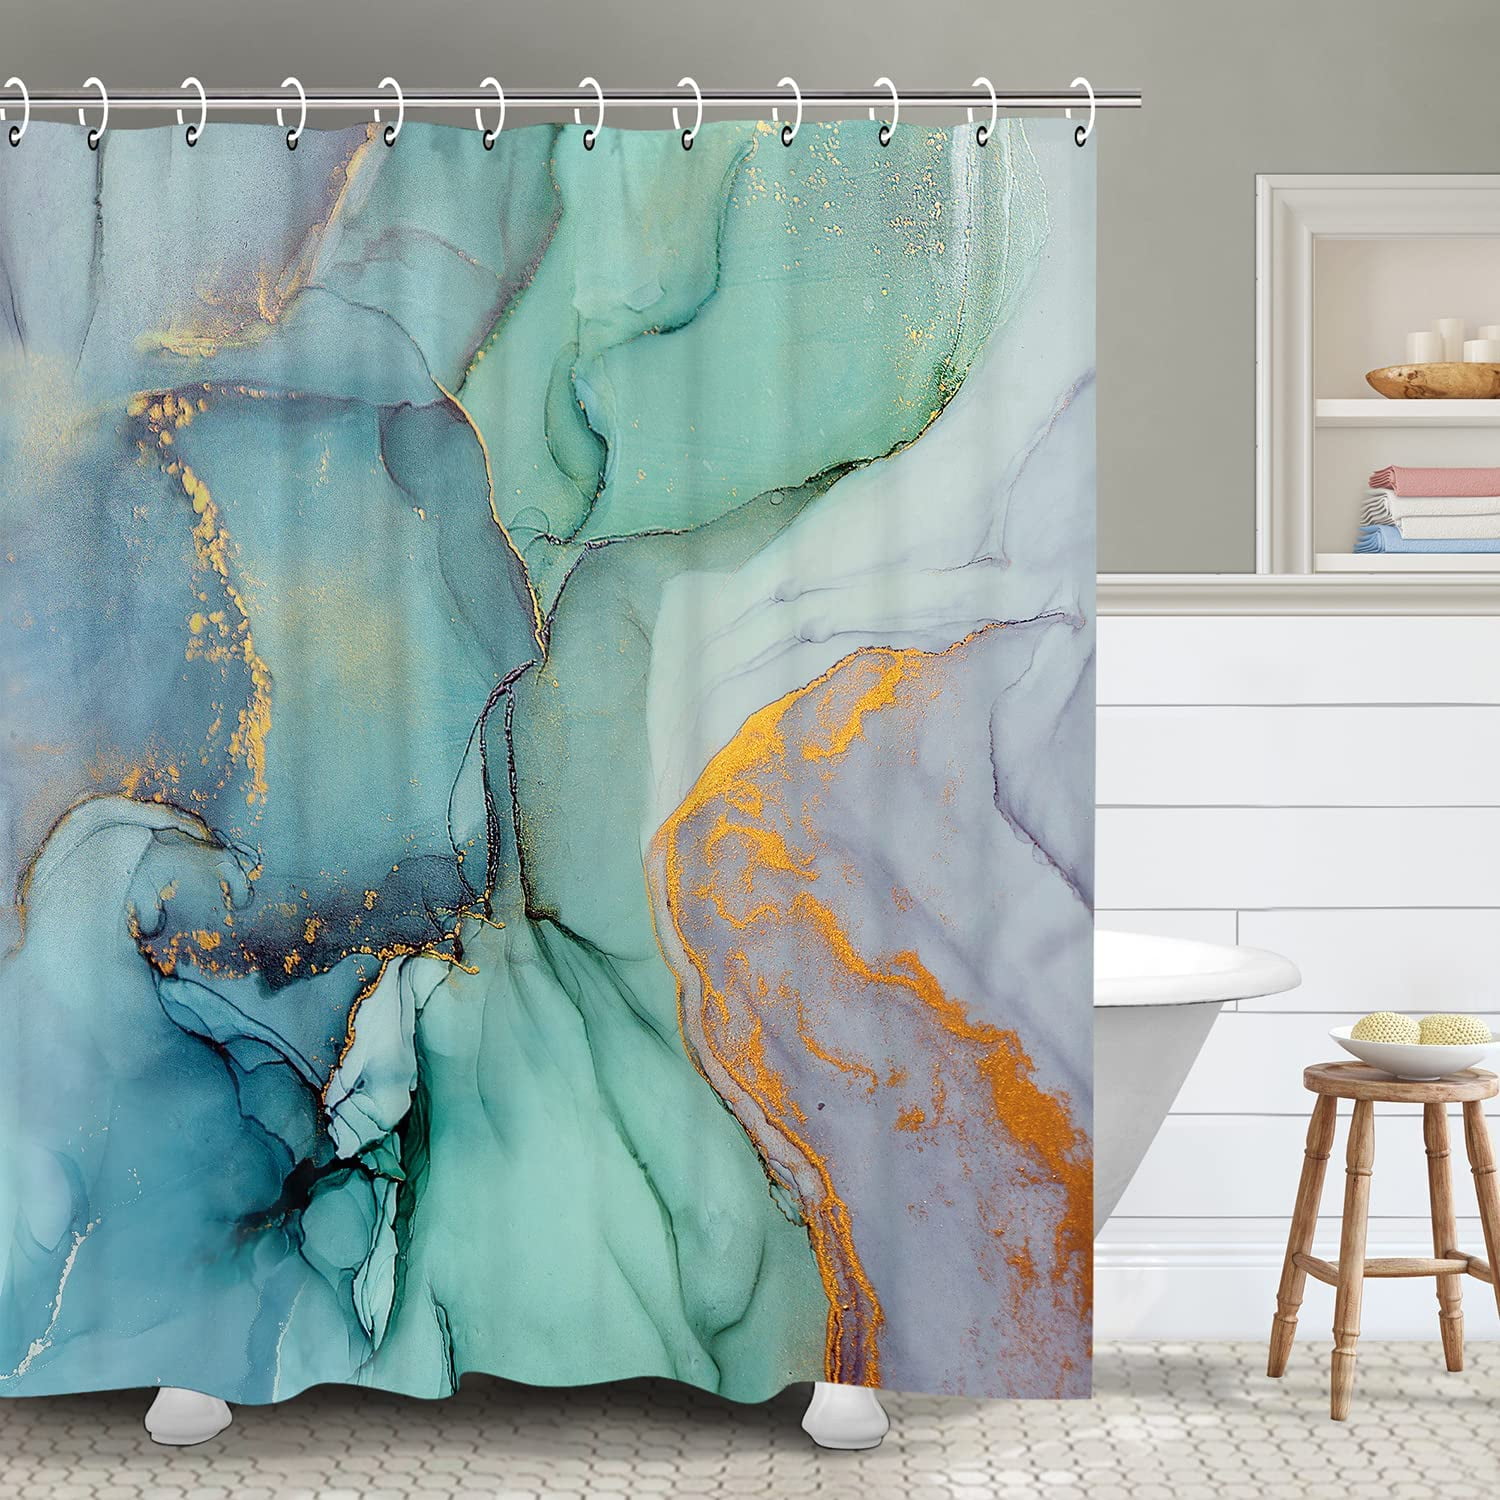 Details about   Sky Ice Fire Waterproof Bathroom Polyester Shower Curtain Liner Water Resistant 